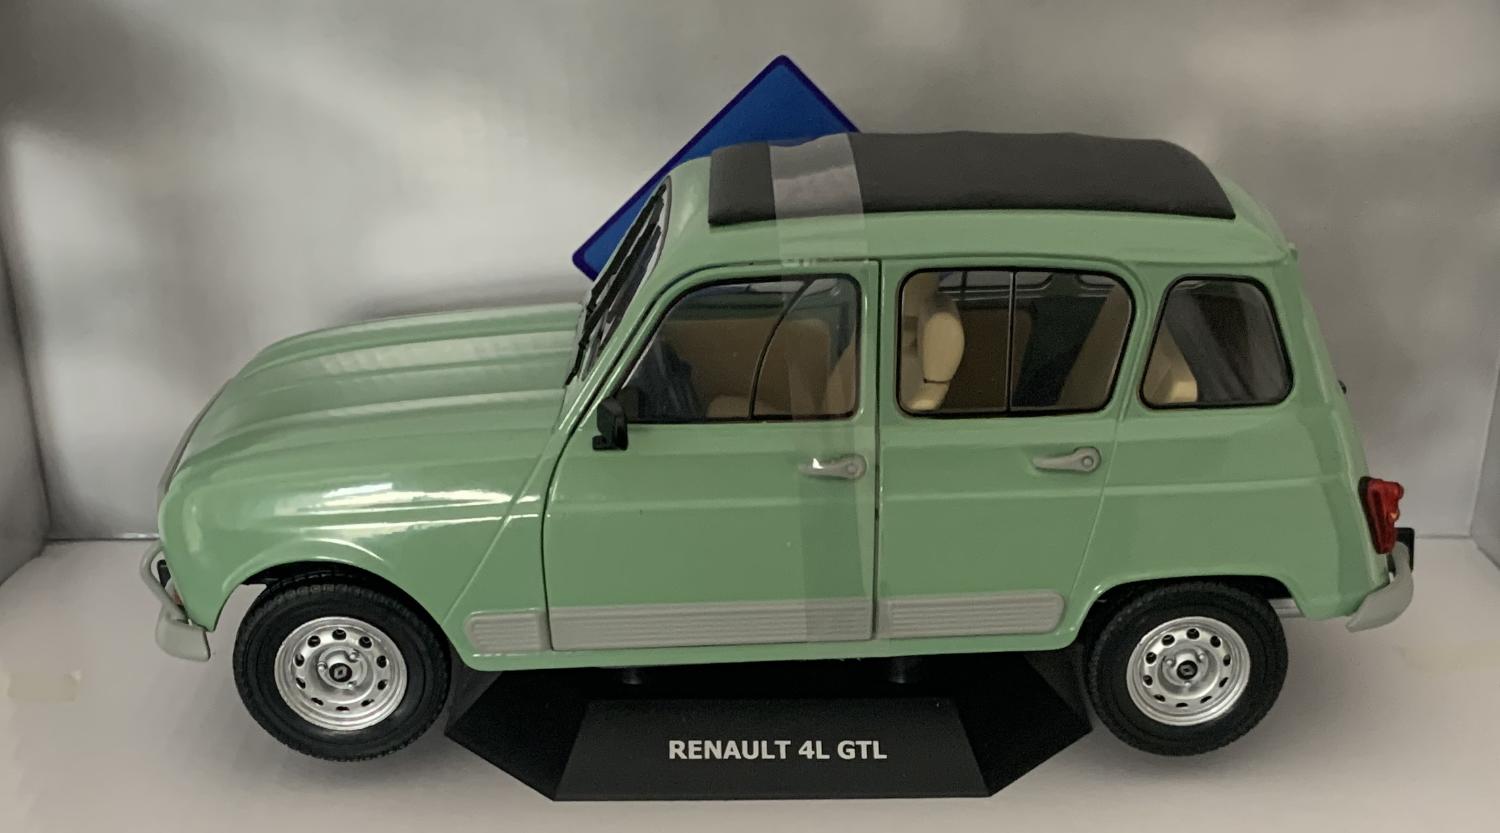 An excellent scale model of the Renault 4L GTL with high level of detail throughout, all authentically recreated.  Model is presented in a window display box.